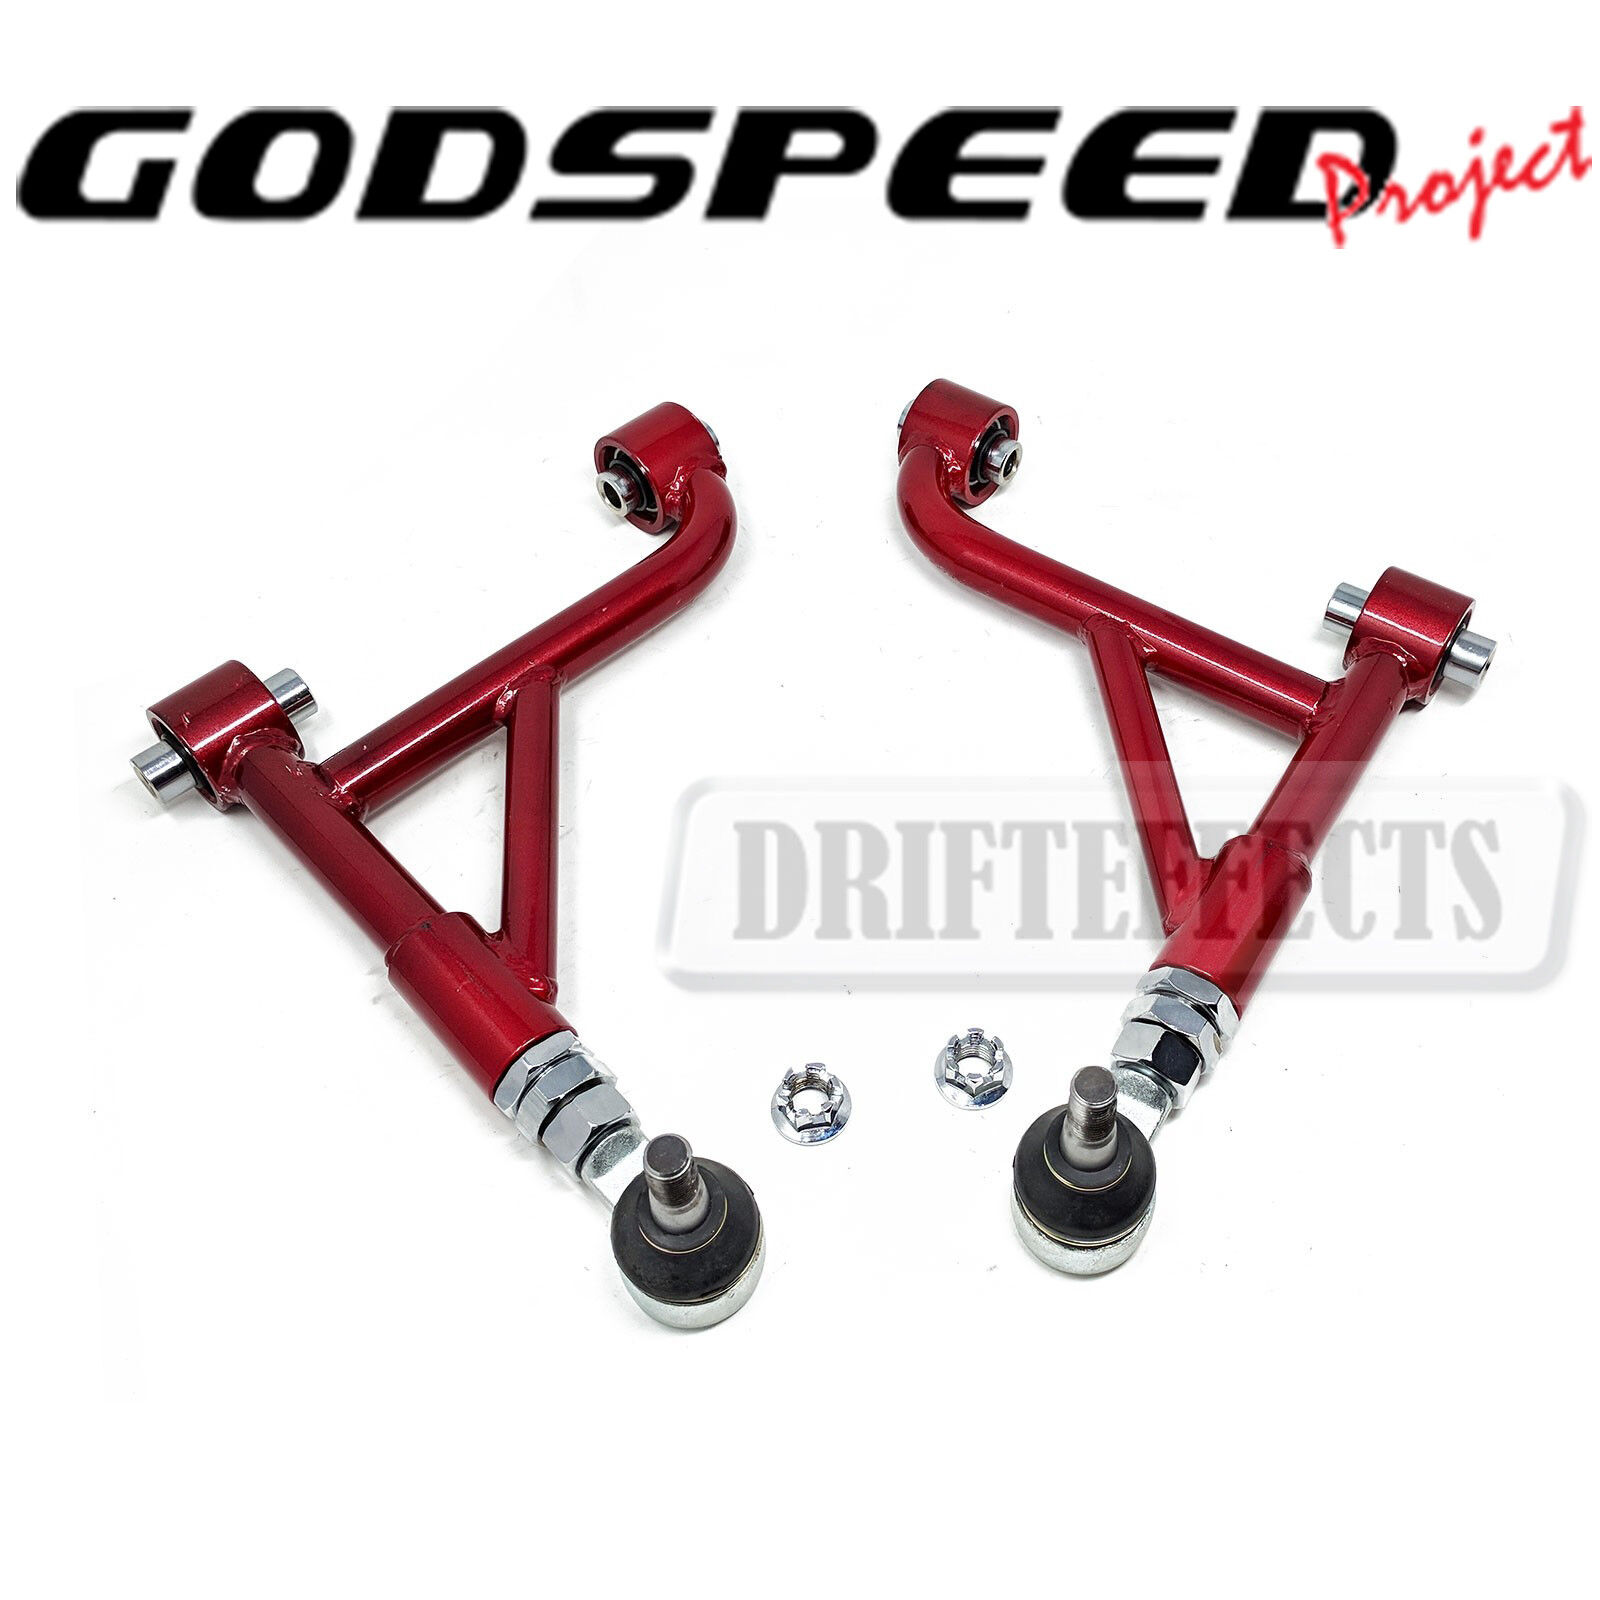 For Lexus GS300 GS400 GS430 S160 98-05 S160 Godspeed Adjustable Rear Camber Arms